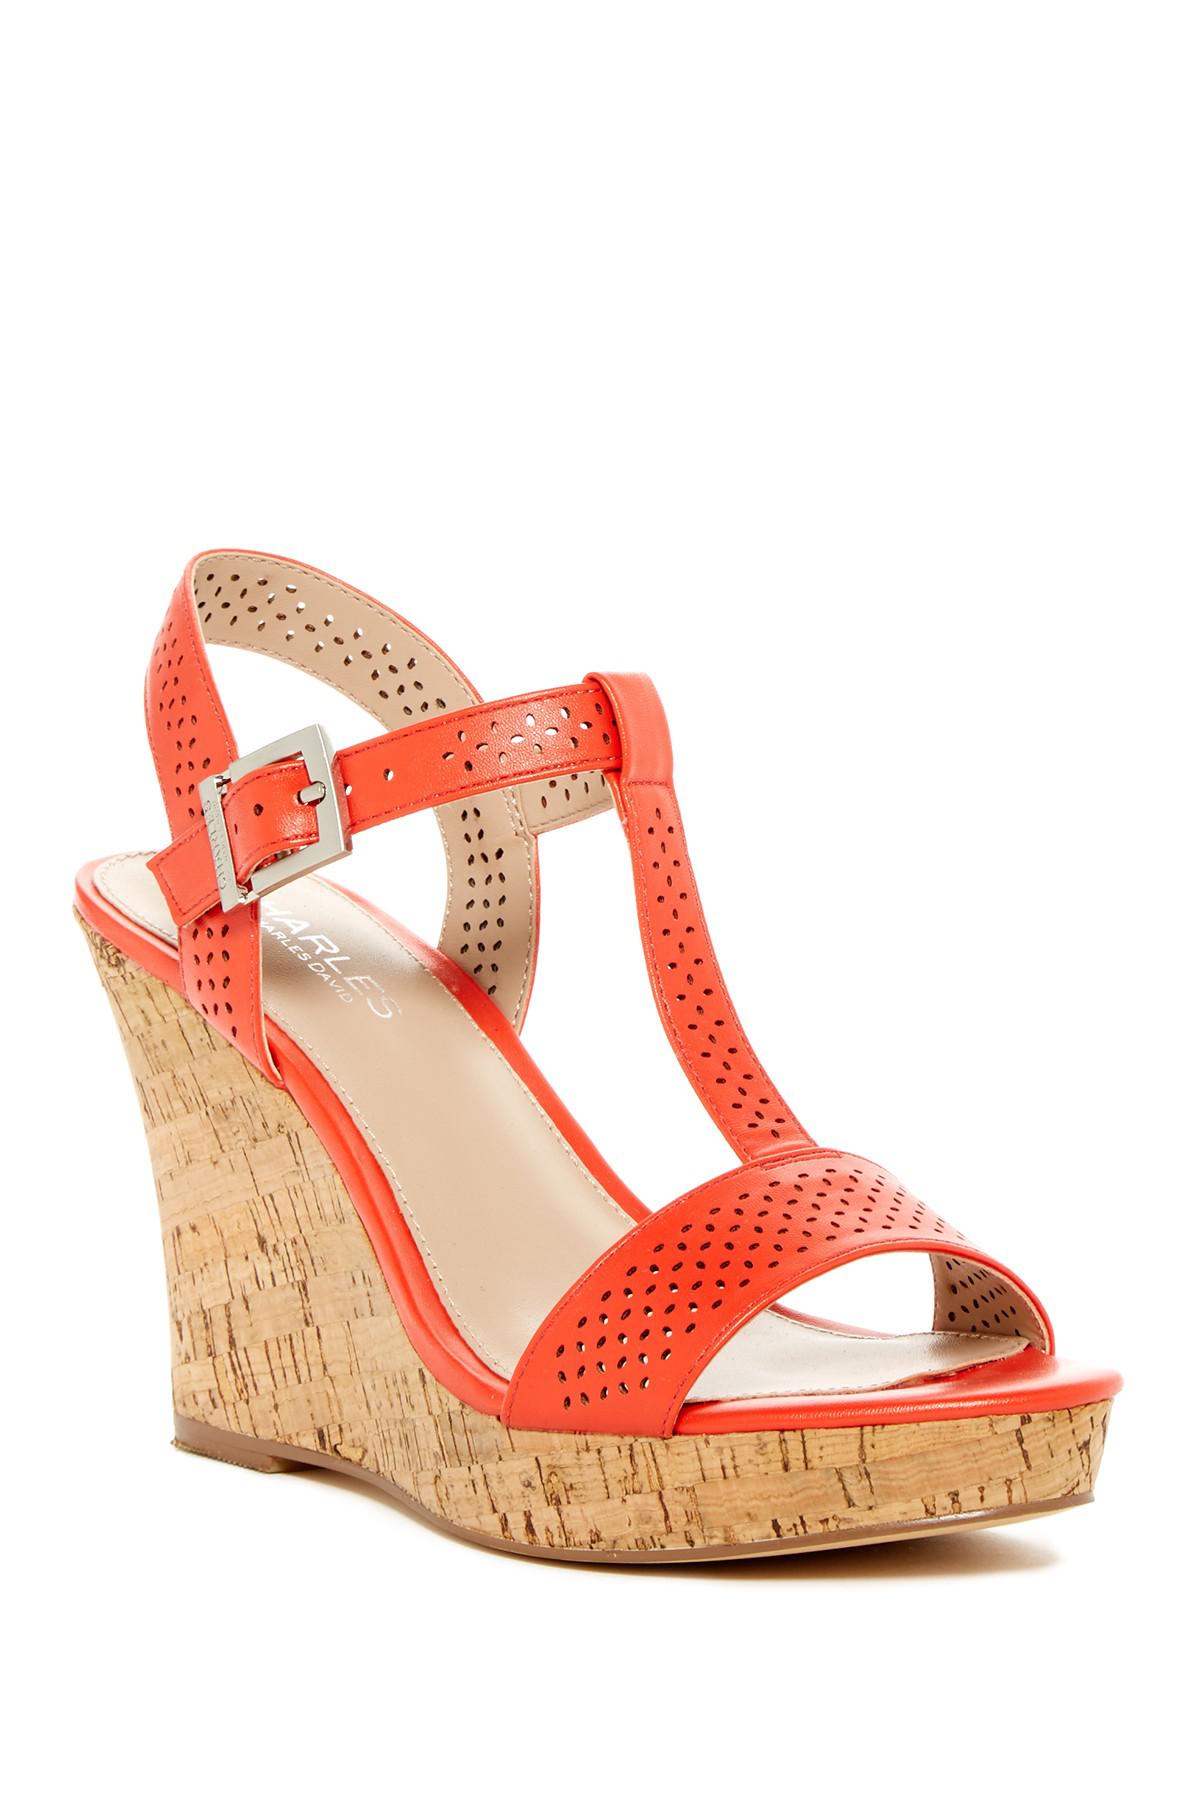 Lyst - Charles David Law Wedge Sandal in Red